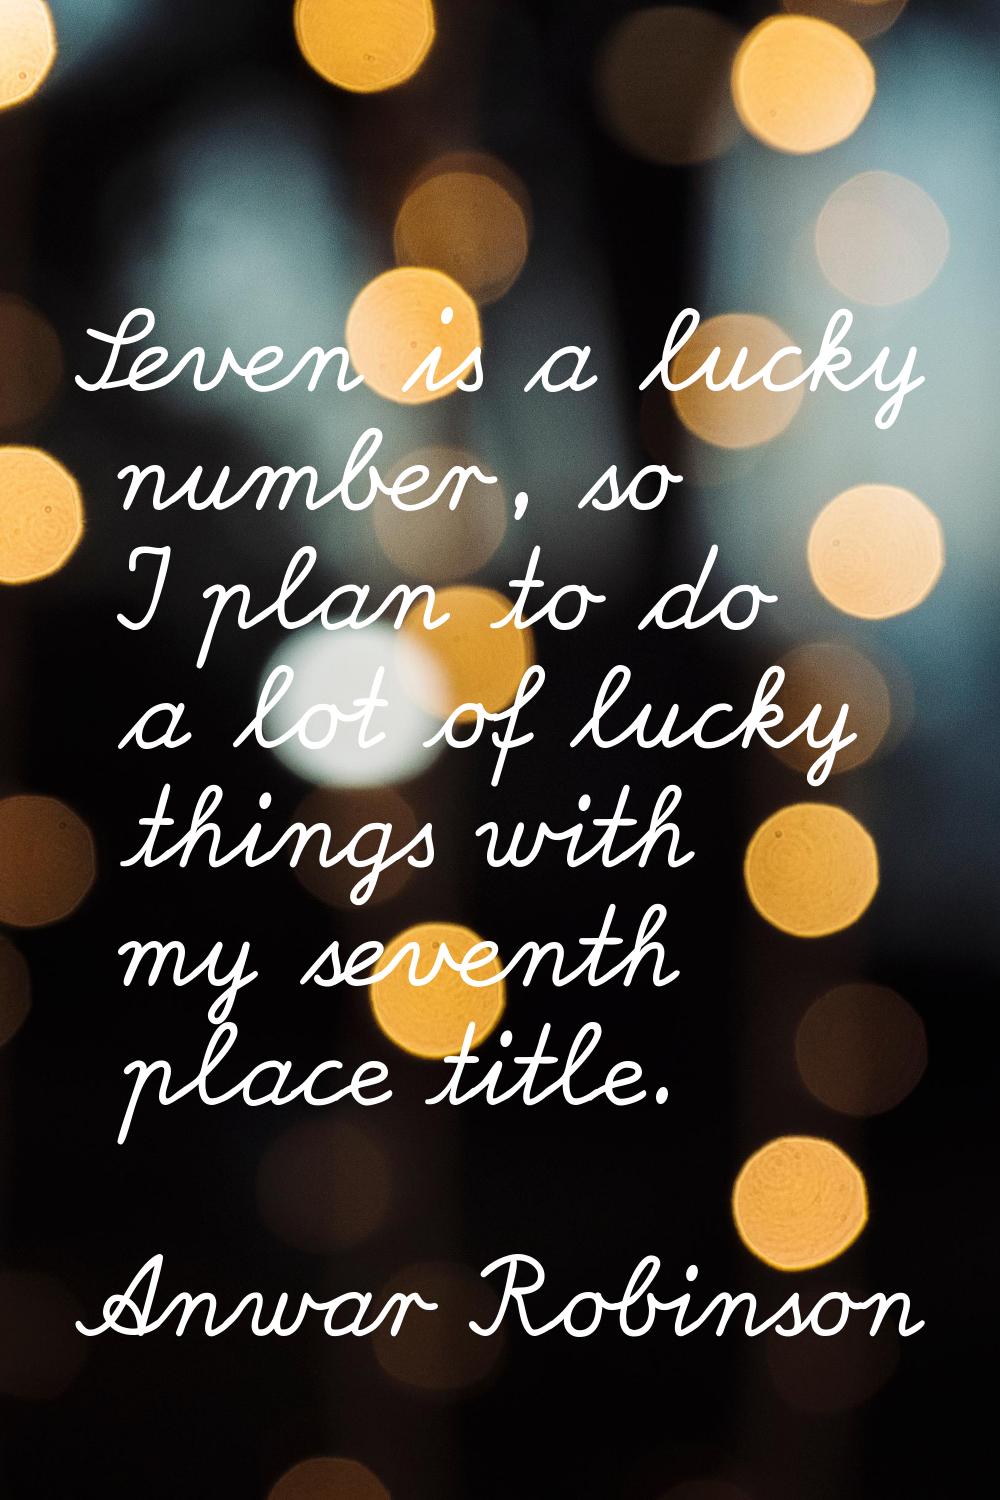 Seven is a lucky number, so I plan to do a lot of lucky things with my seventh place title.